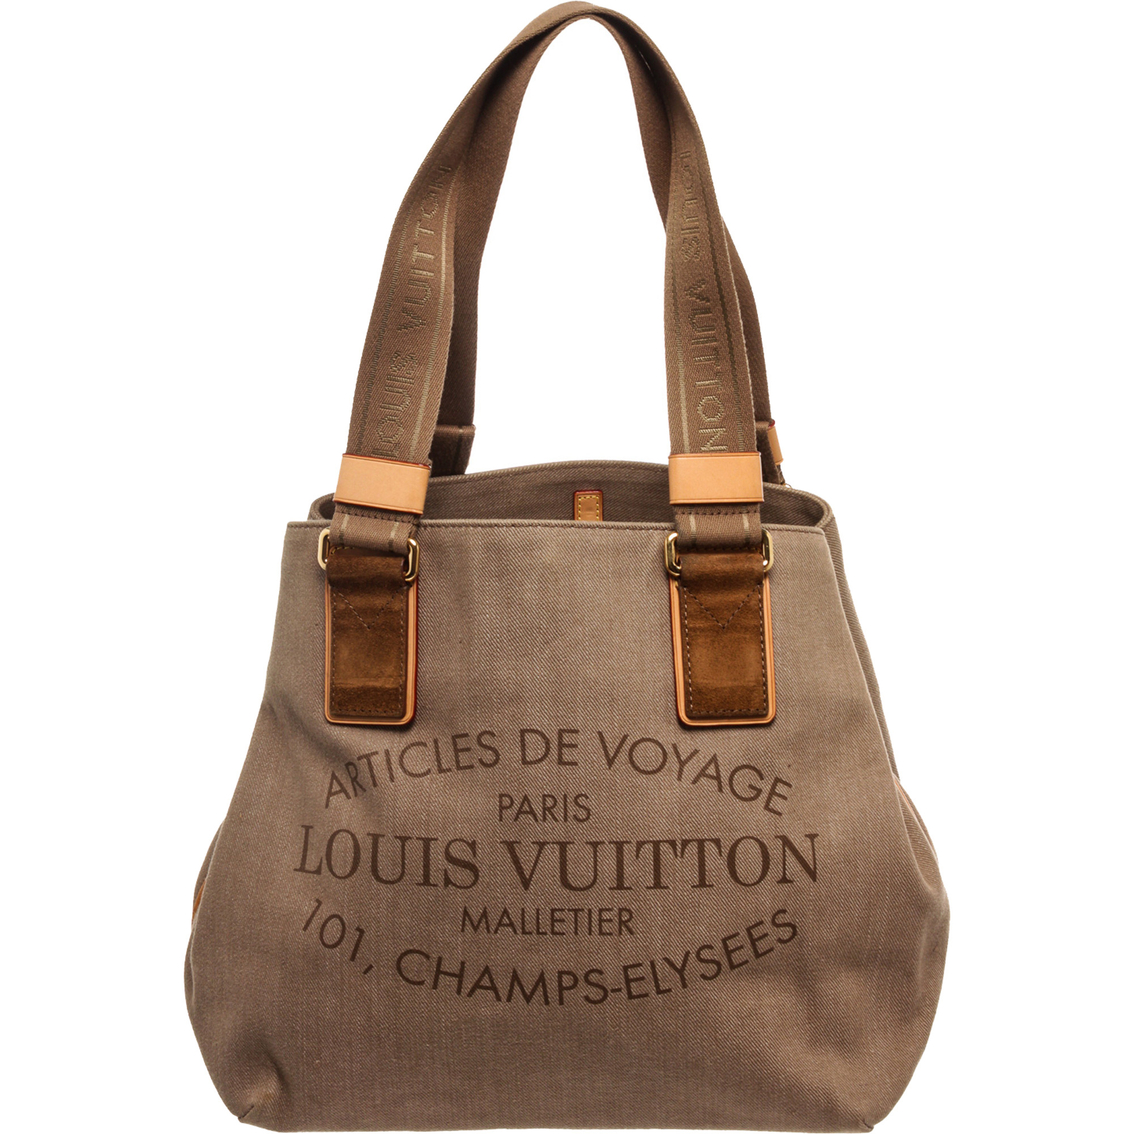 Authenticated Used LOUIS VUITTON Louis Vuitton Brasserie Must-Have